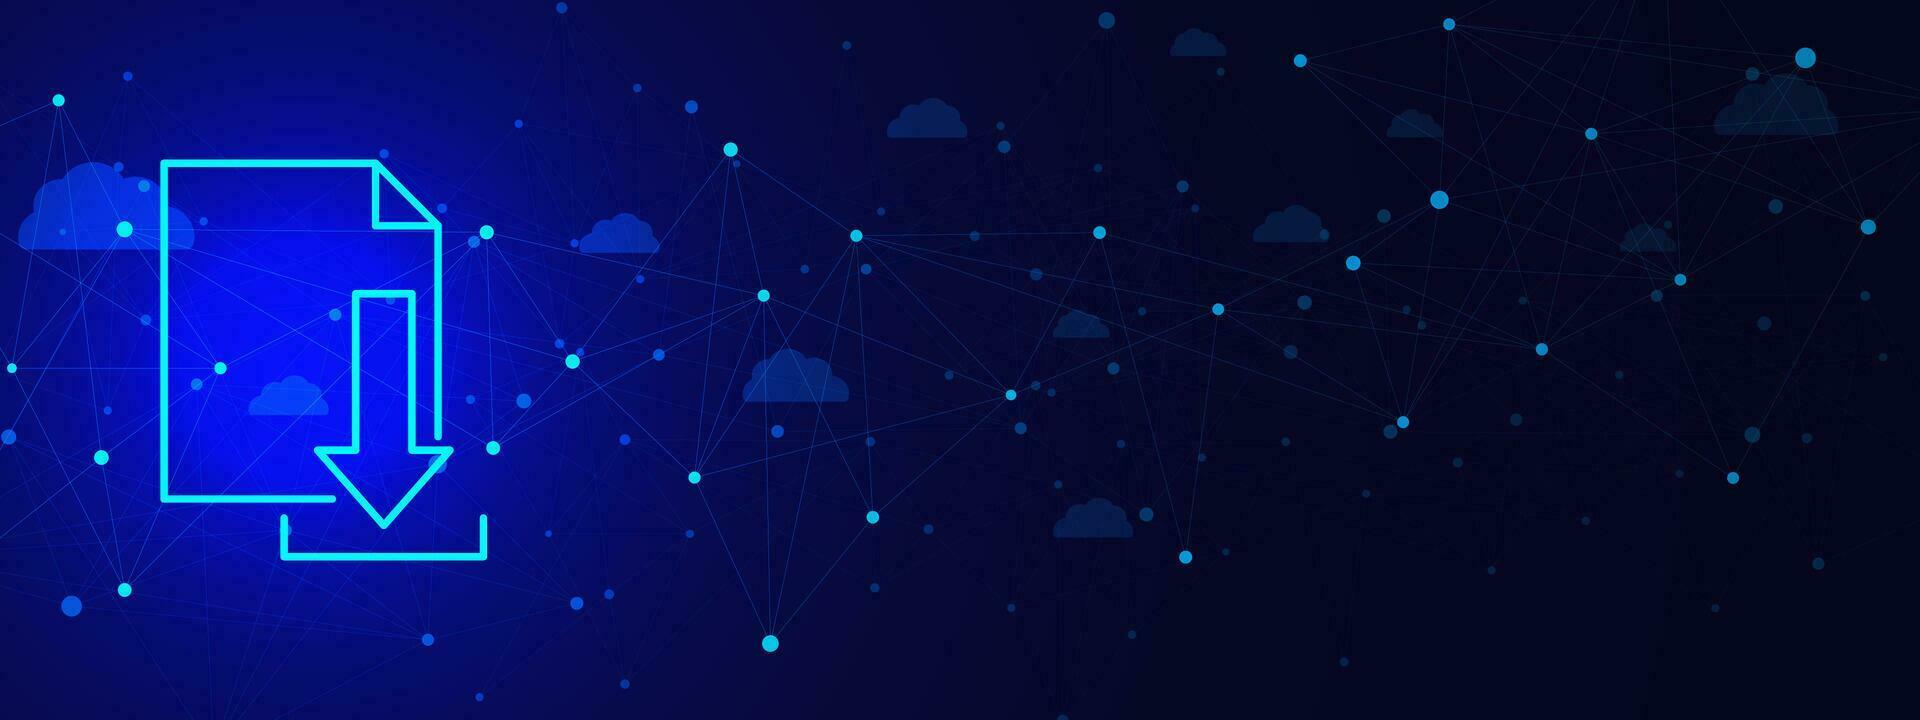 Downloading from cloud data storage with connecting dots and lines. Digital transfer data concept background. Vector illustration.